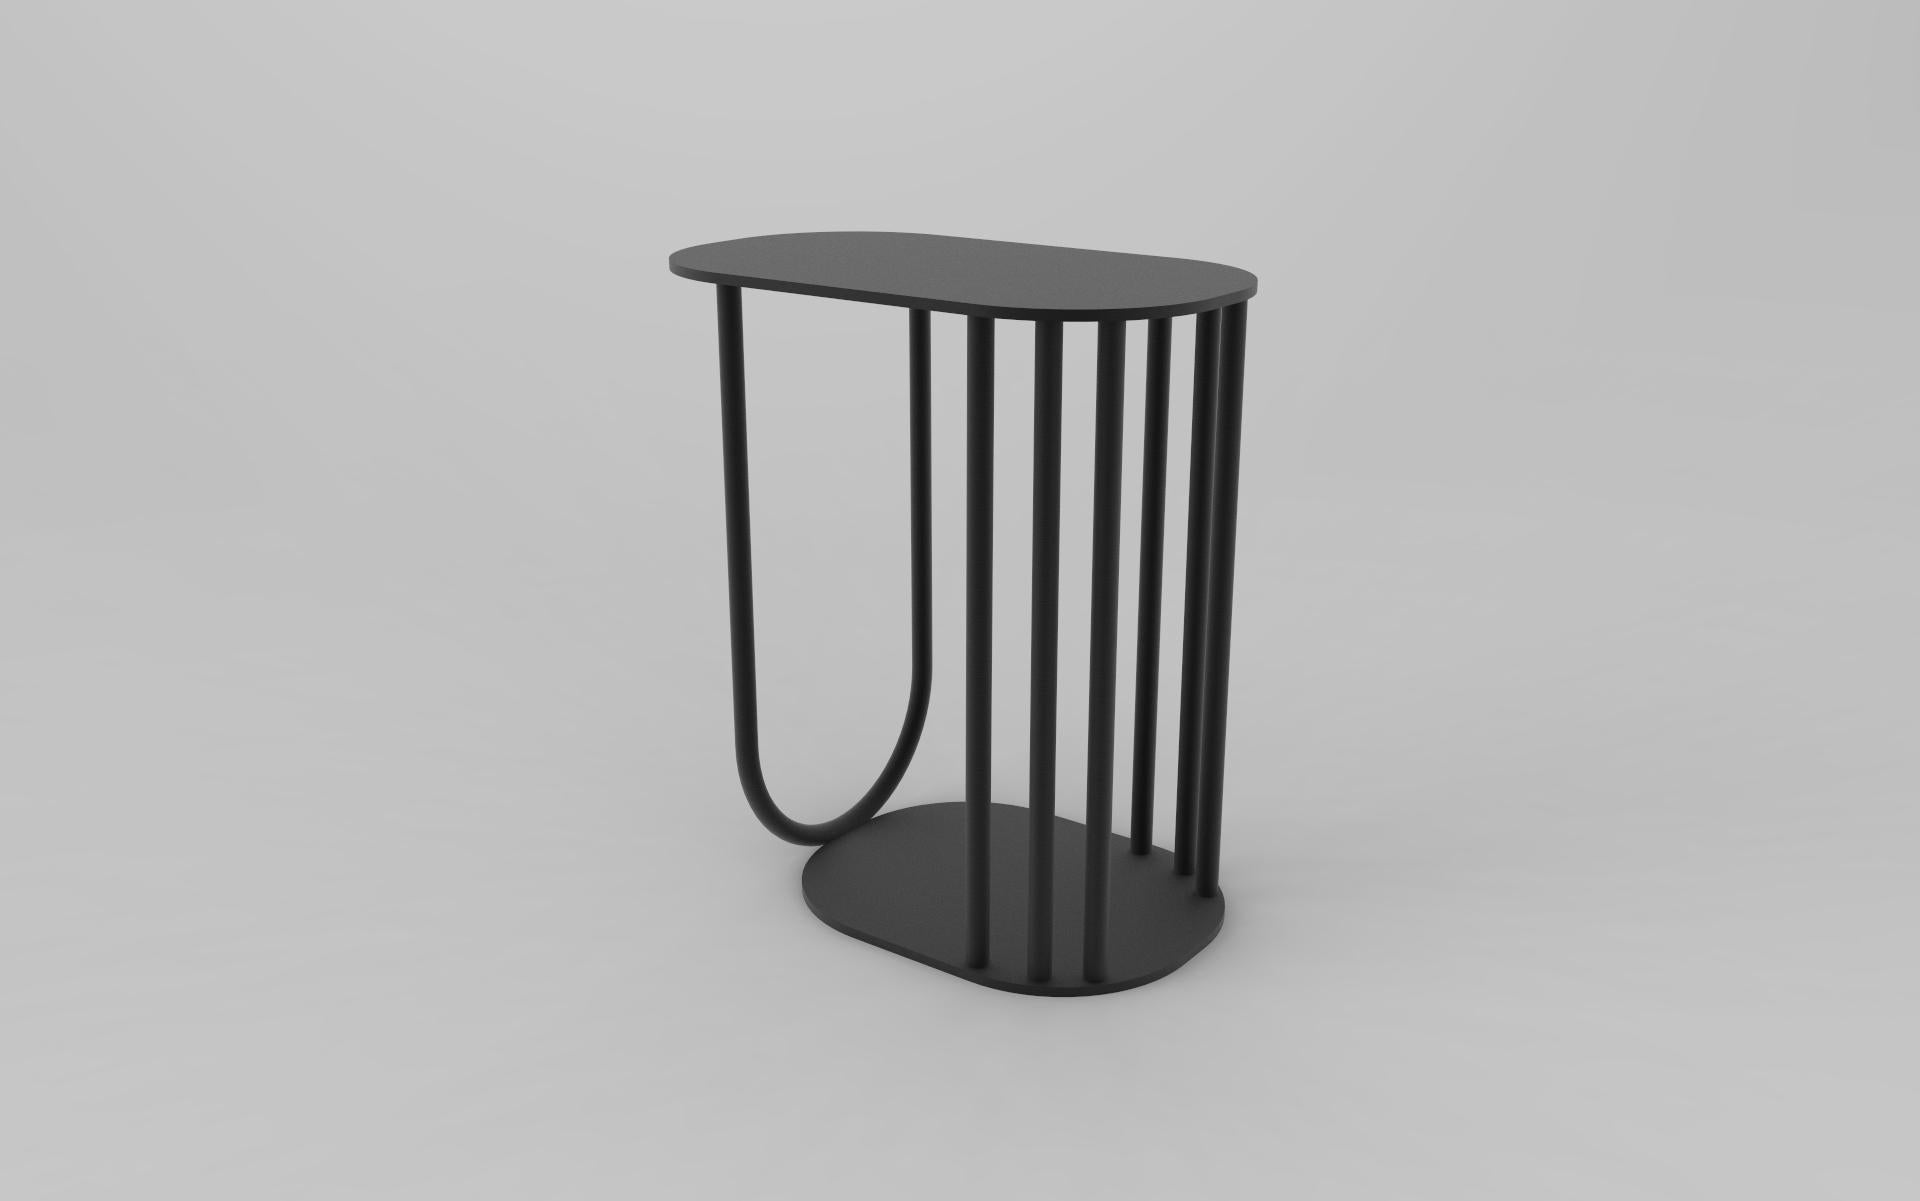 Atlantis Side Table by Studio Laf 
Dimensions: L 40 cm x W 23 x H 44 cm
Materials: Metal
Also Available in two different materials: Black Metal or Brass, please contact us for more information.


It emerged with a combination of simple linear